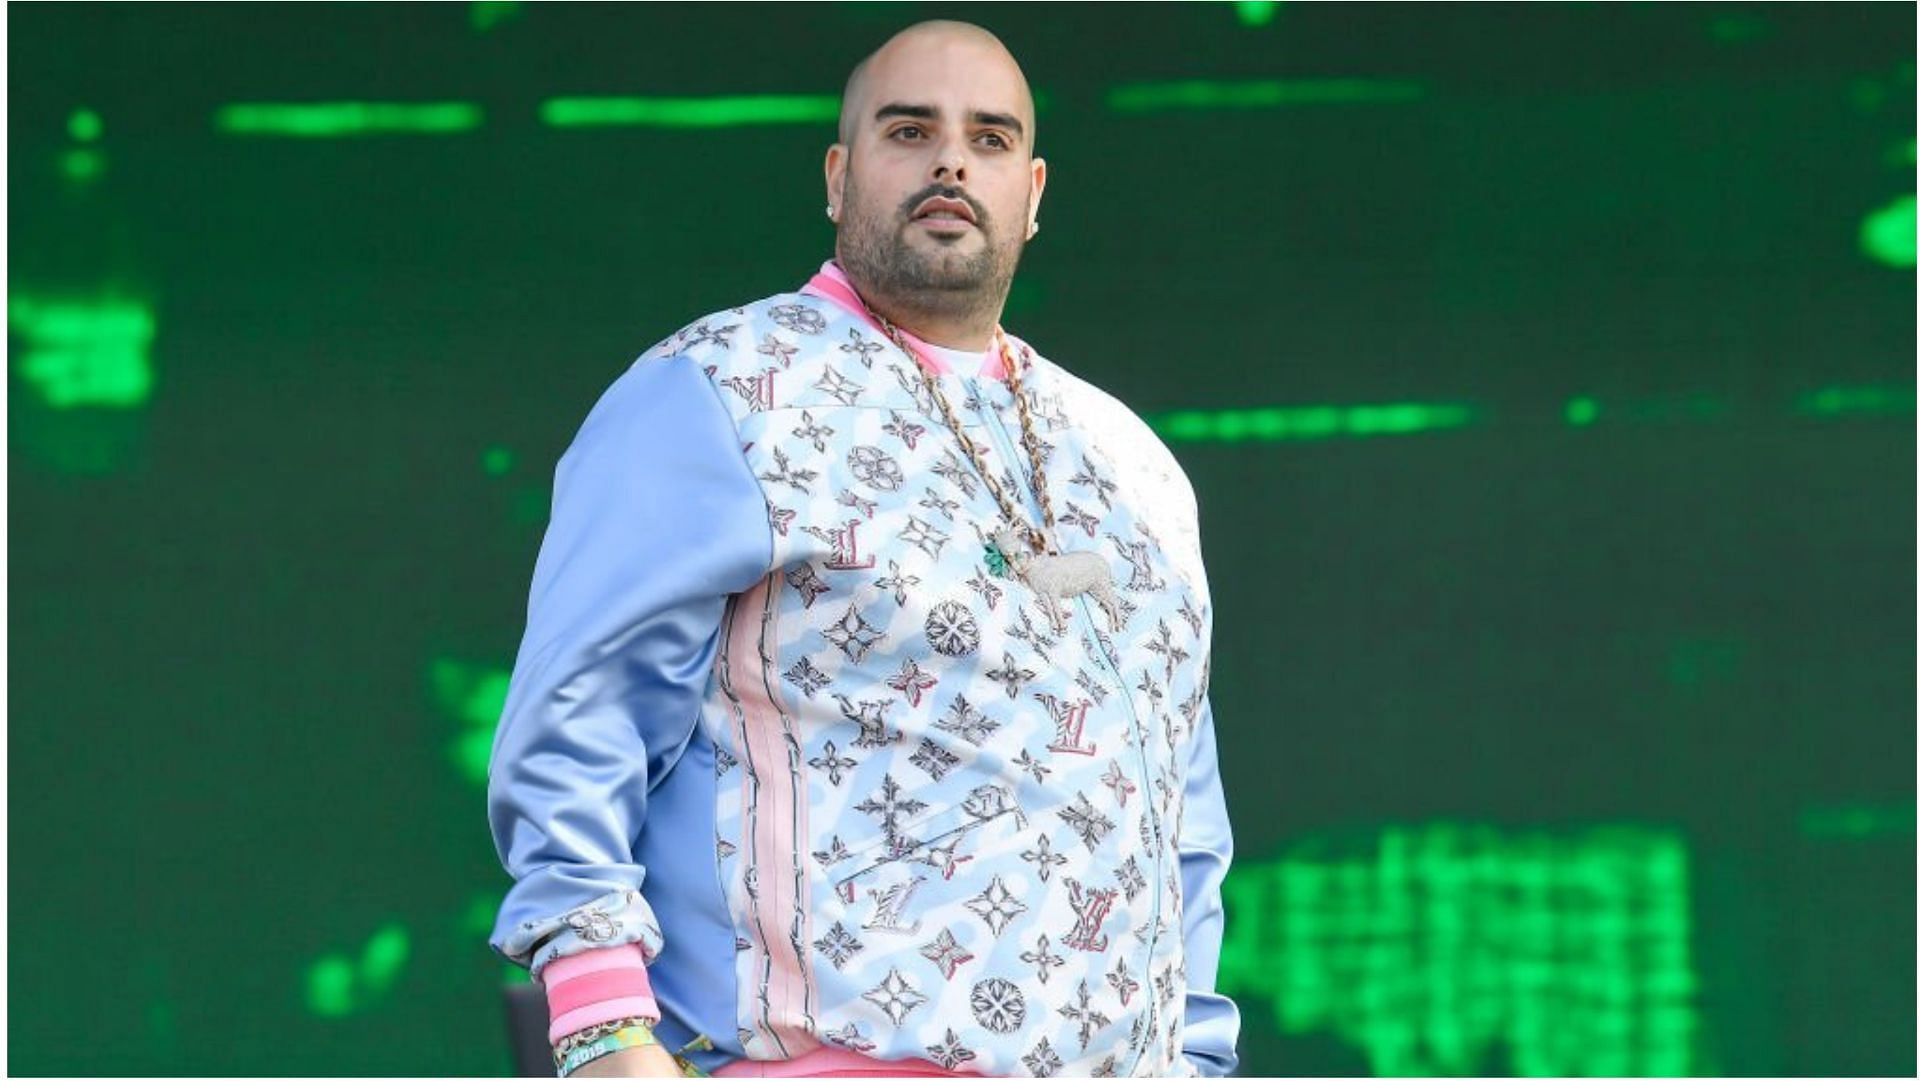 Who is Berner? Net worth and more explored as rapper makes surprise